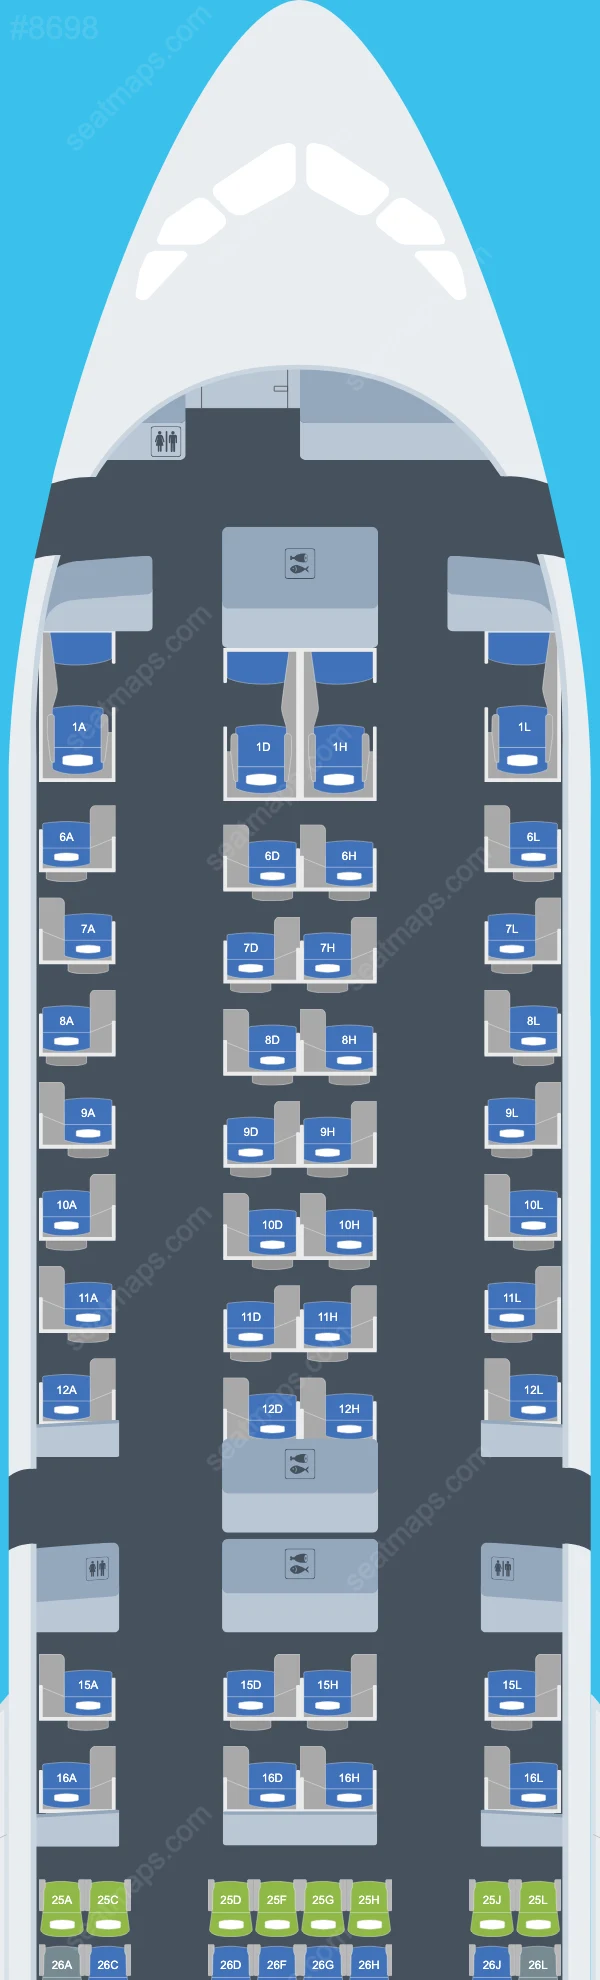 China Eastern Airbus A350-900 seatmap preview